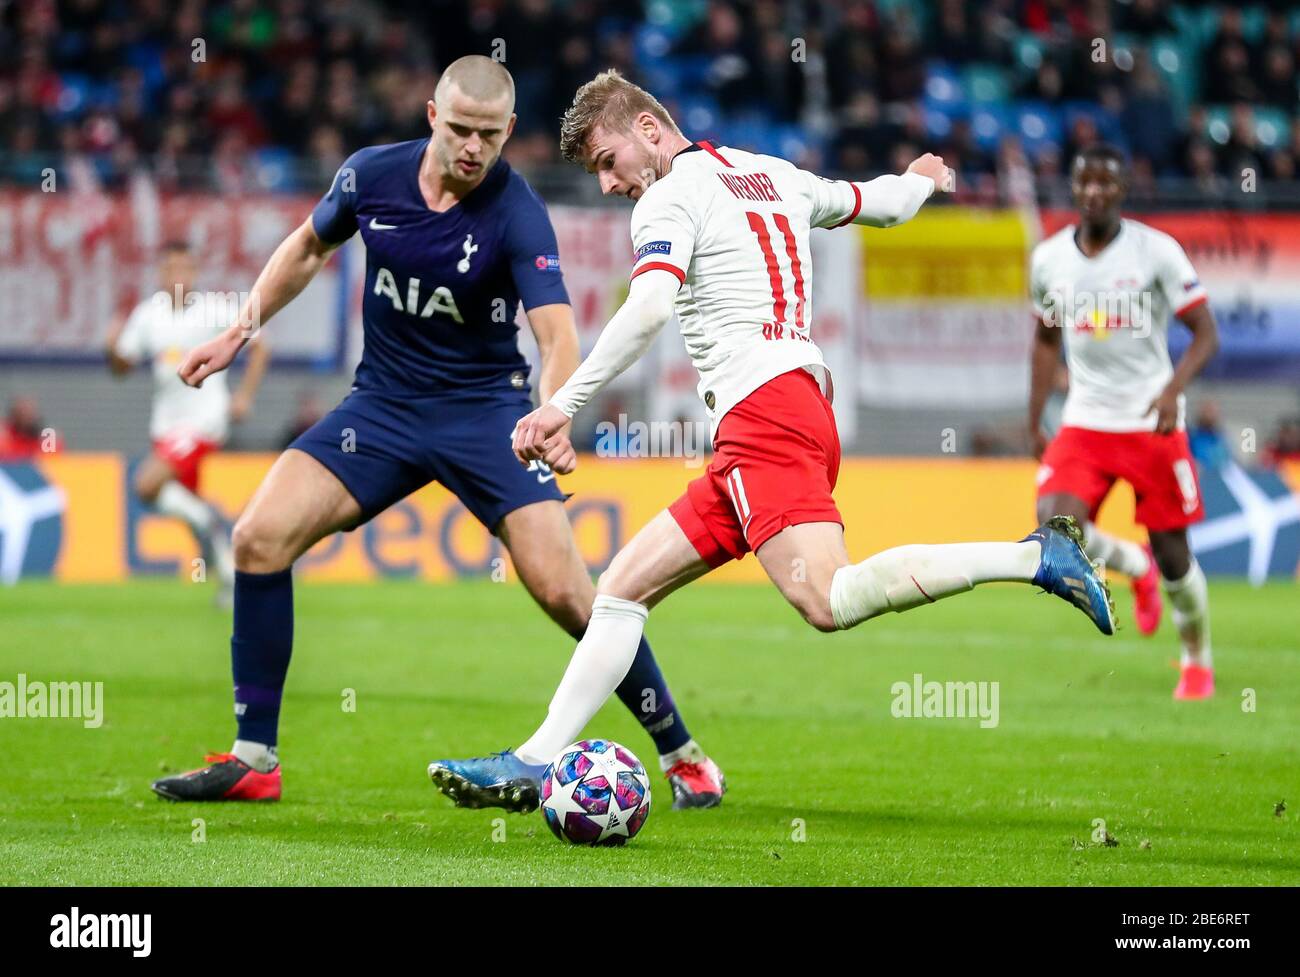 Leipzig, Germany. 10th Mar, 2020. Football: Champions League, Round of 16,  RB Leipzig - Tottenham Hotspur in the Red Bull Arena. Leipzig's Timo Werner  (r) and Tottenham's Eric Dier in action. Credit: